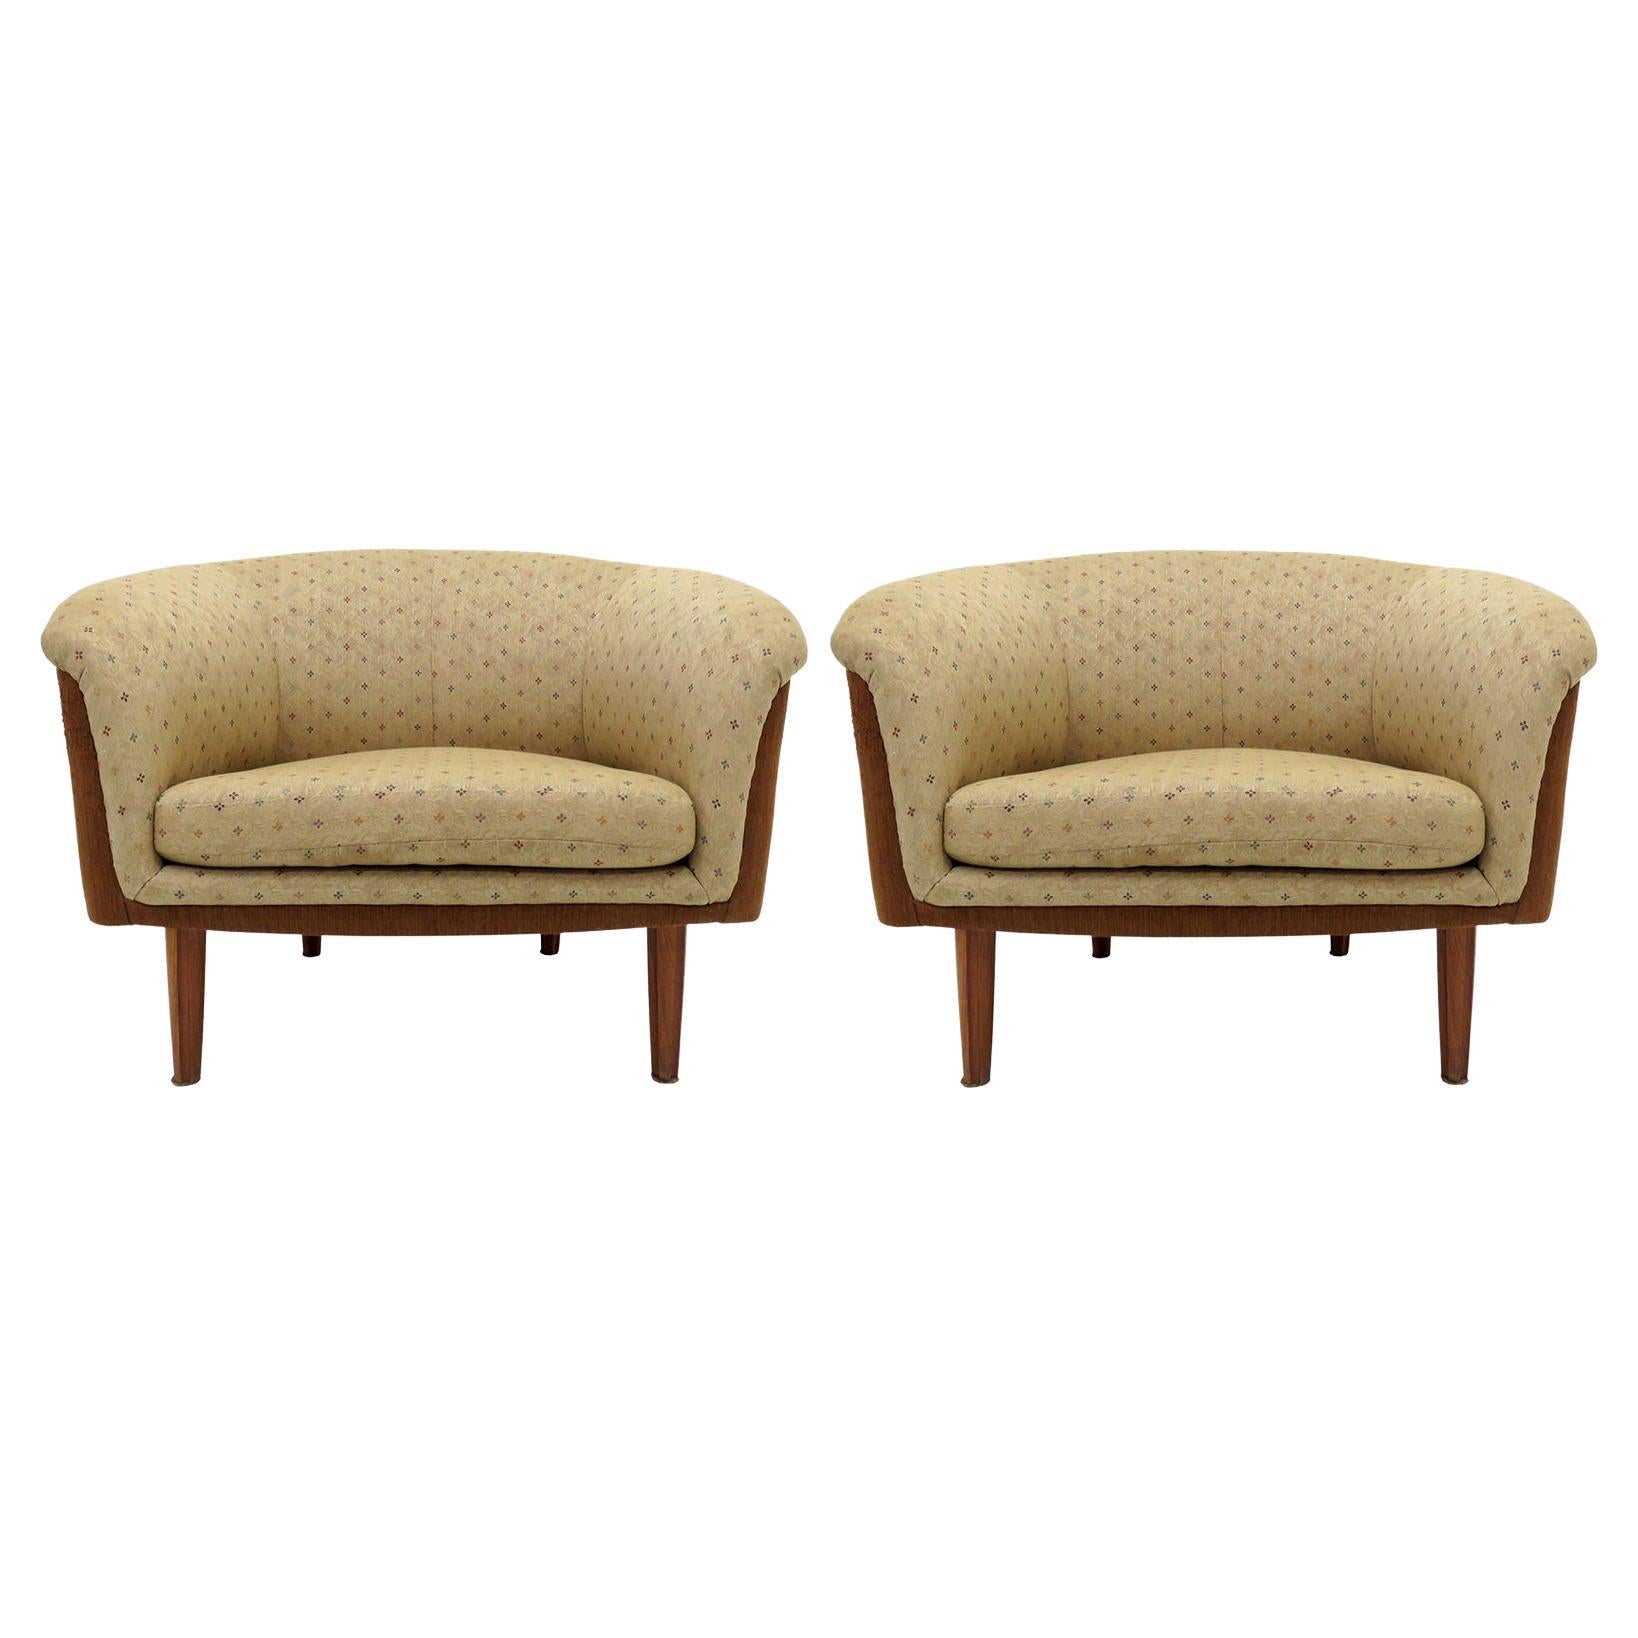 Pair of Swedish Oversized Lounge Chairs, 1960 For Sale